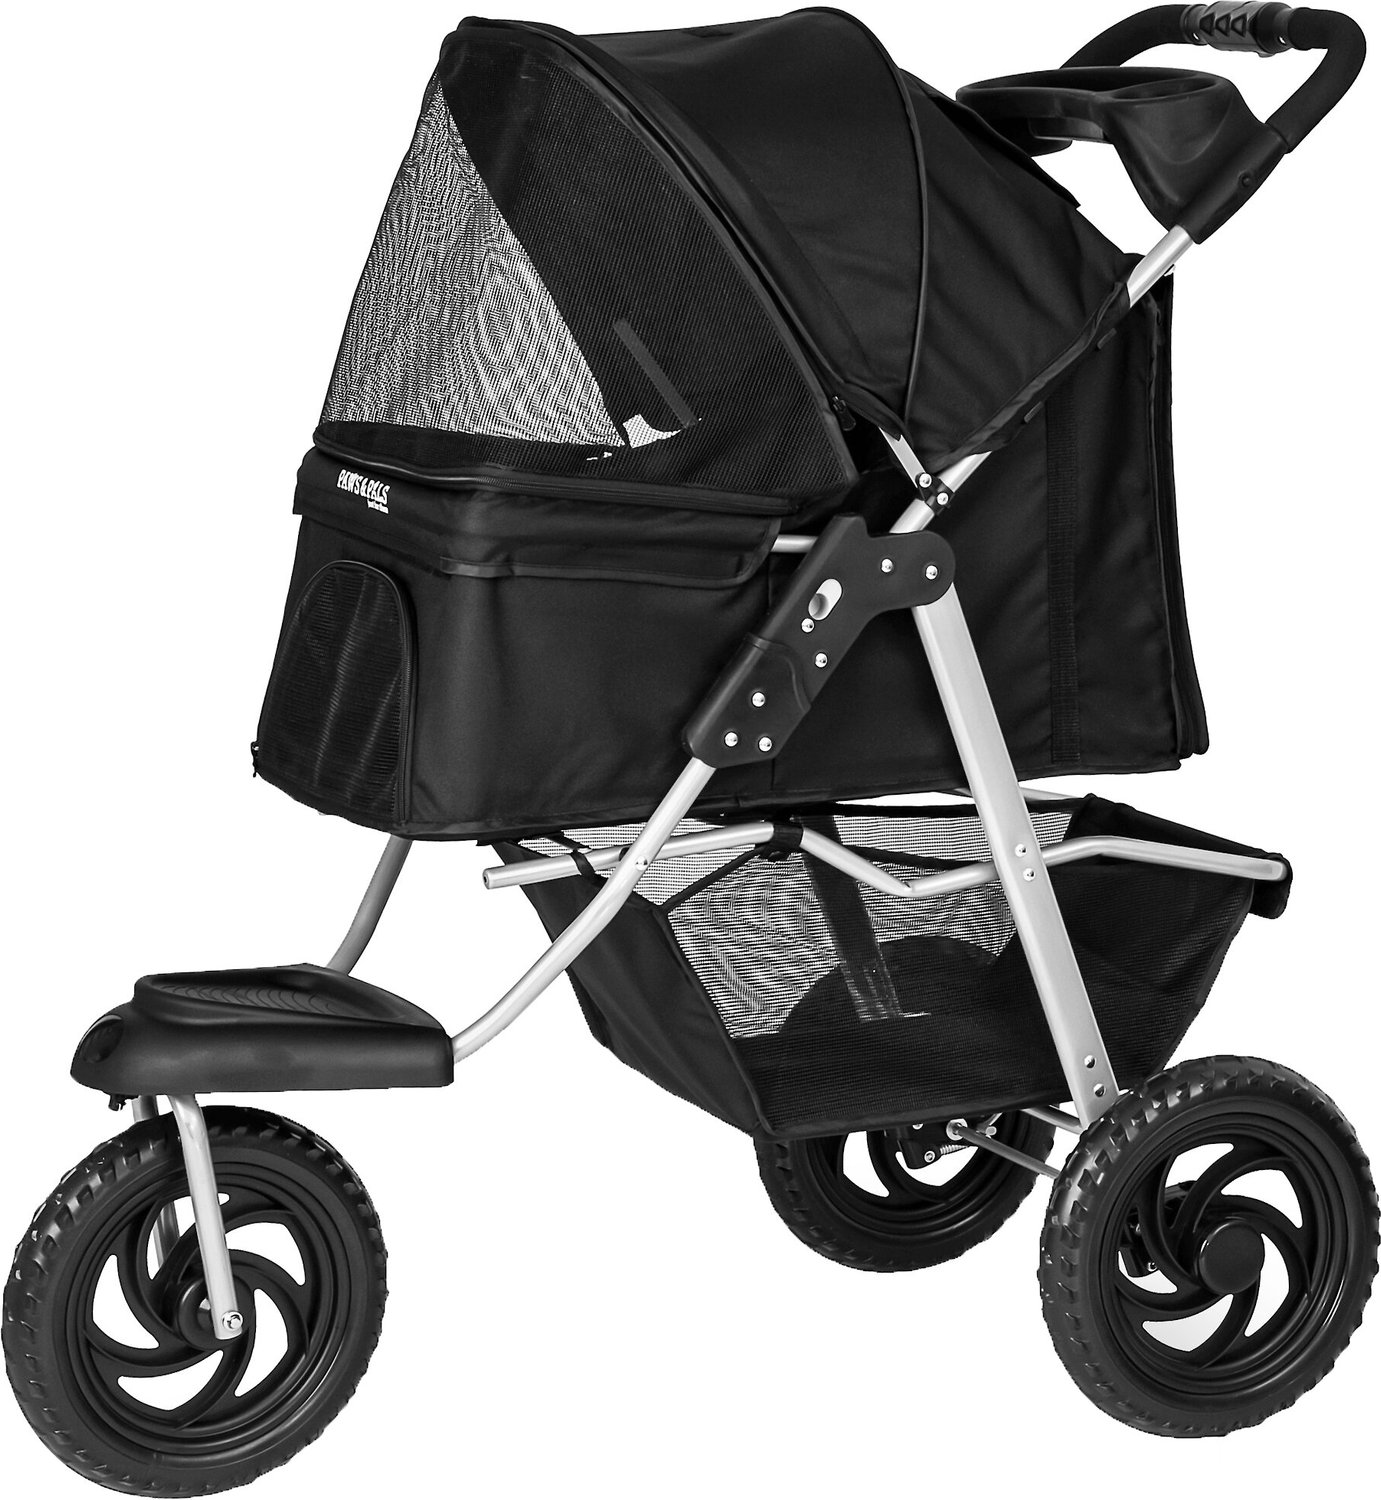 paws & pals deluxe folding dog & cat stroller